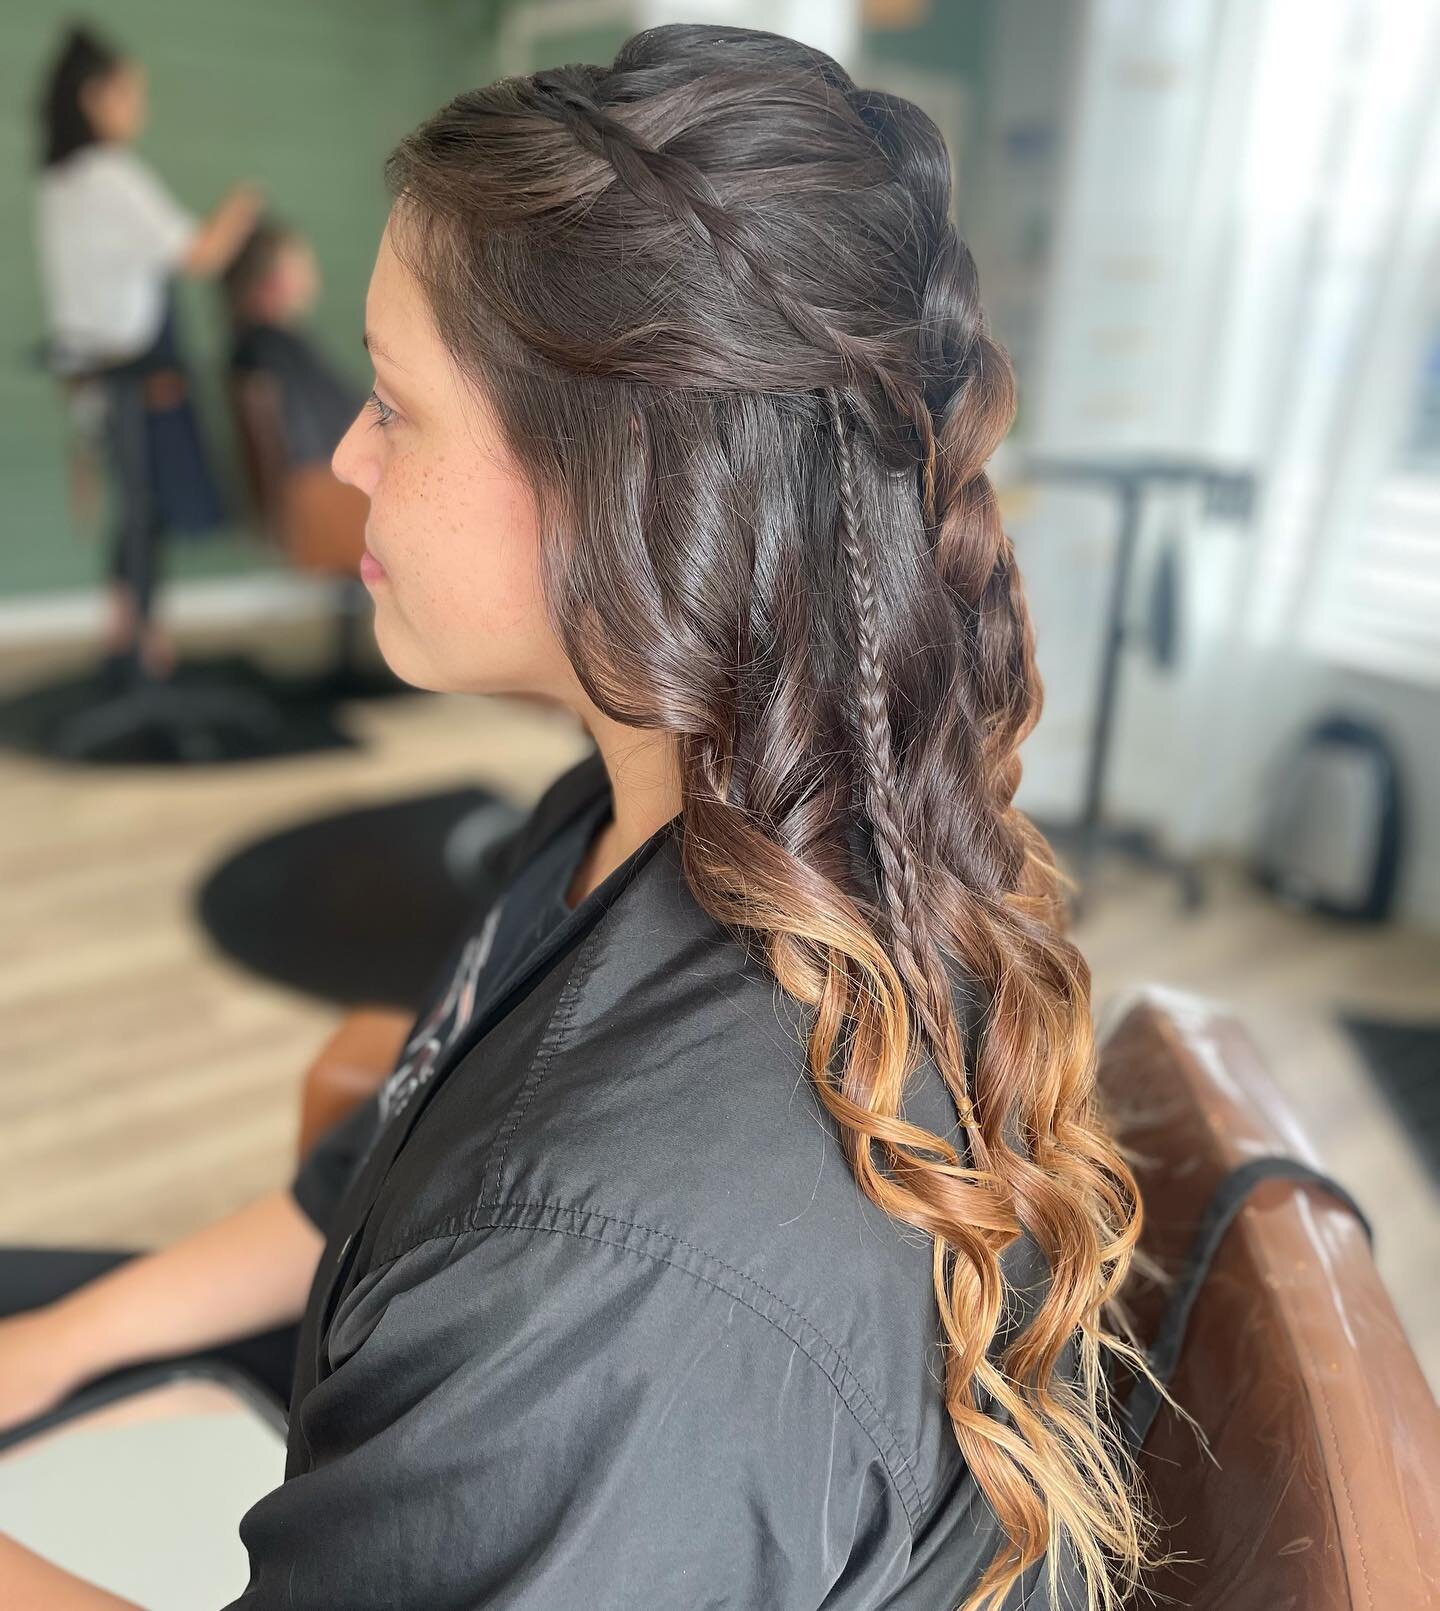 Happy Prom season to all you lovelies of 2022!! We are so happy that the these milestone events are back! Thank you for choosing us to style you for your special day! Hair by Stylist Daniela Leiva  Makeup by Raquel Lopez @lunarising_esthetics 
#proms